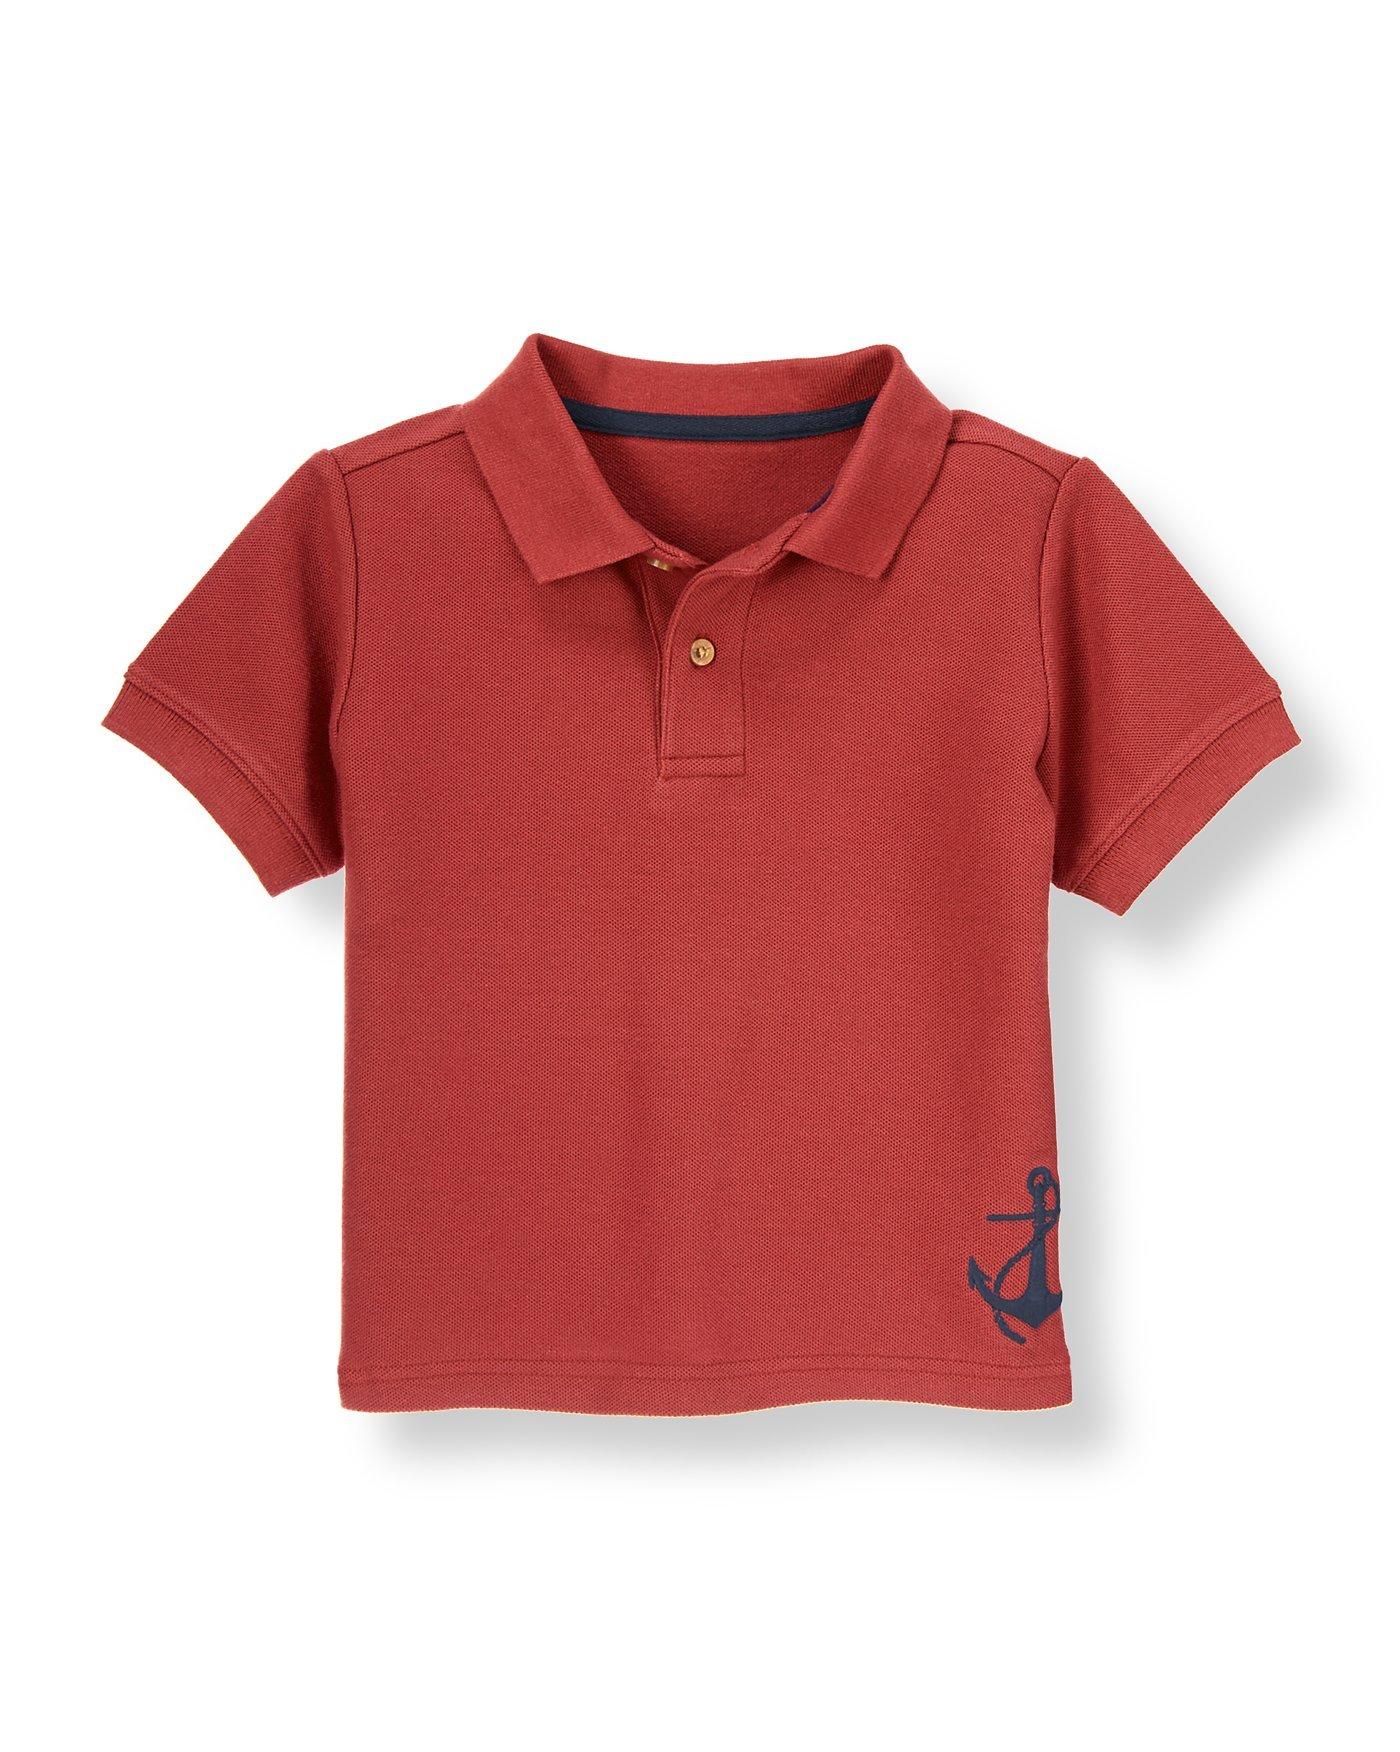 Anchor Polo Shirt image number 0